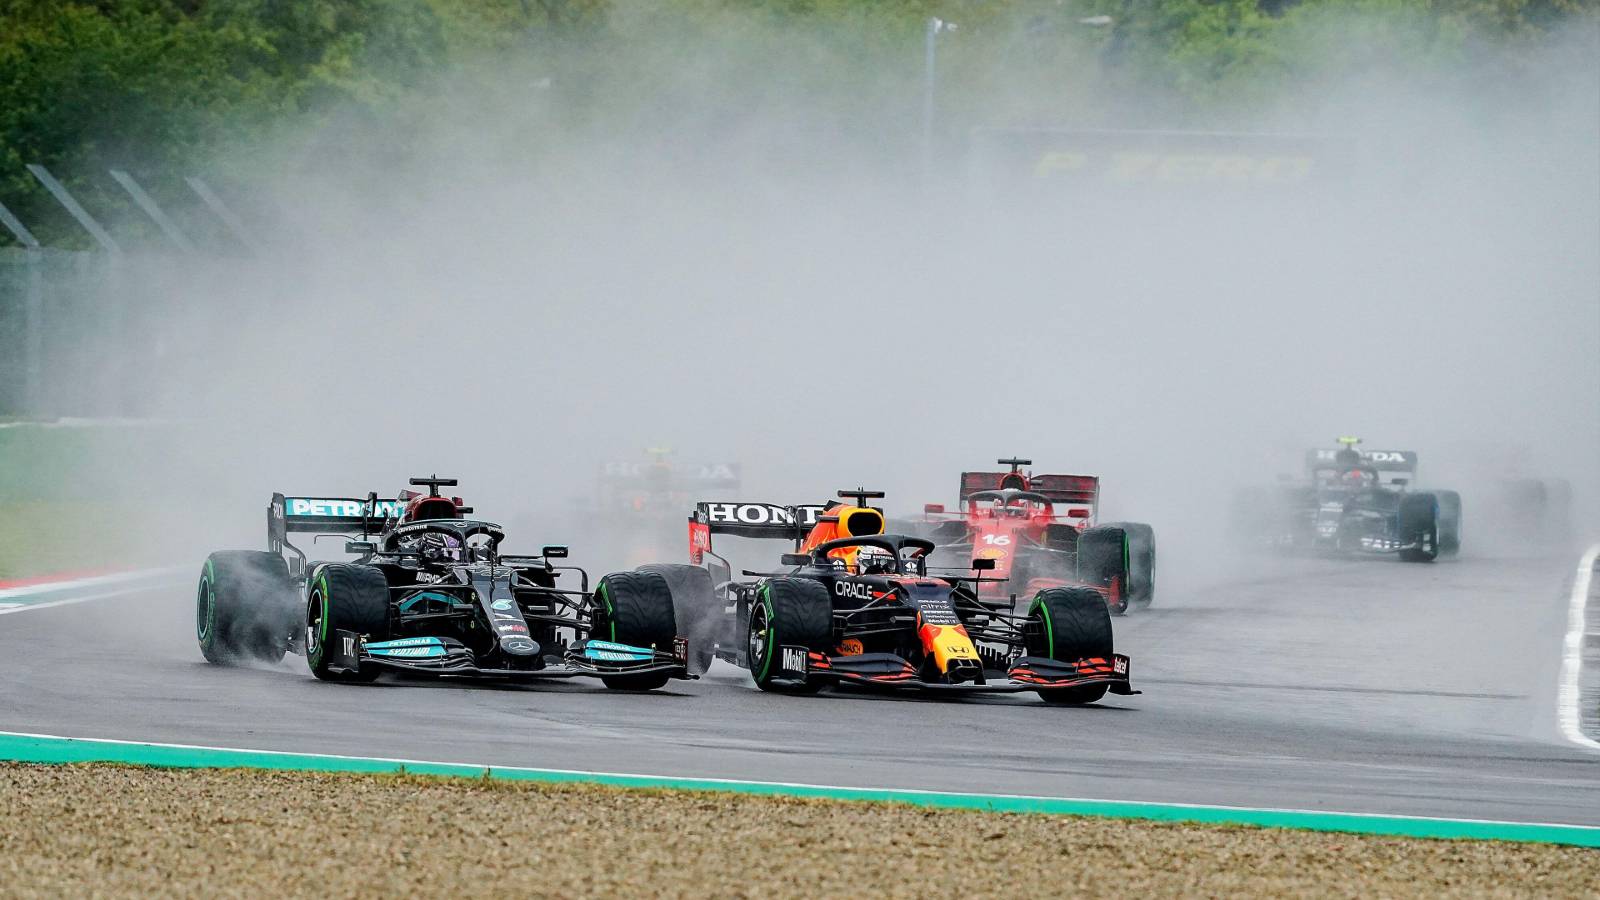 Lewis Hamilton and Max Verstappen side by side at the Emilia Romagna GP. April 2021.